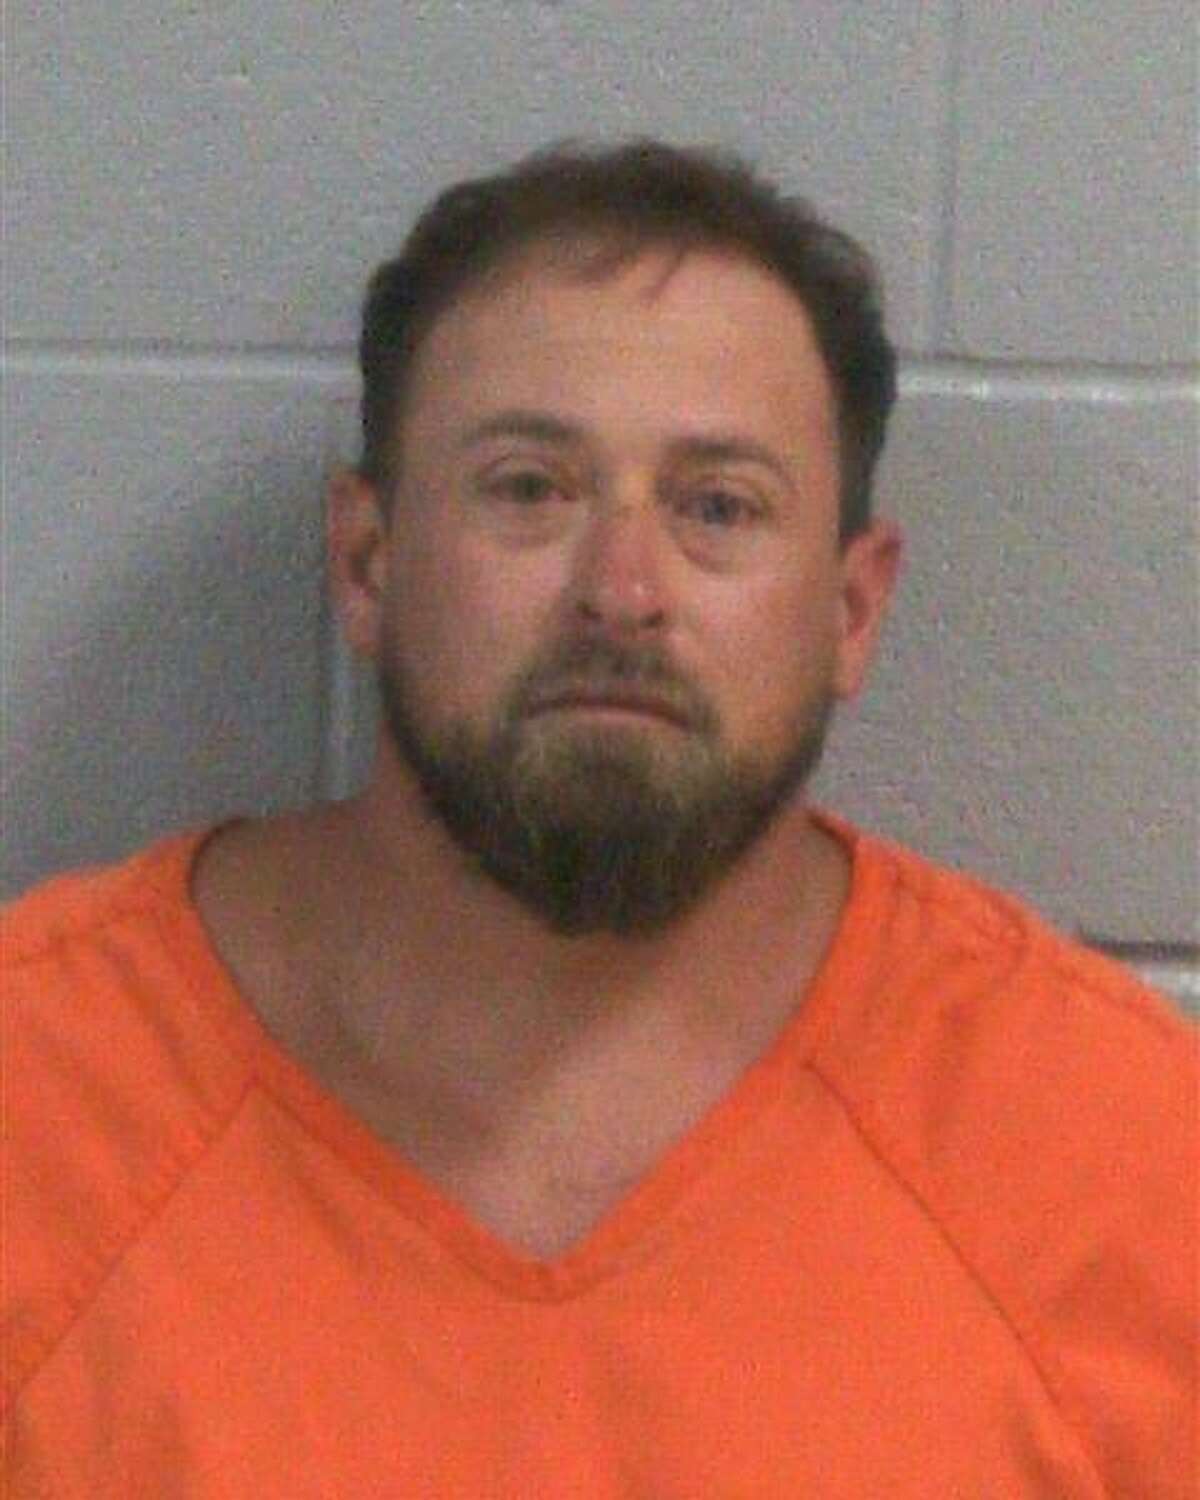 George Butler, 35, was being held at Midland County Jail on Tuesday, July 5, 2022, for assault on a peace officer/judge, a second-degree felony; burglary of habitations, a second-degree felony; and two misdemeanor charges. 